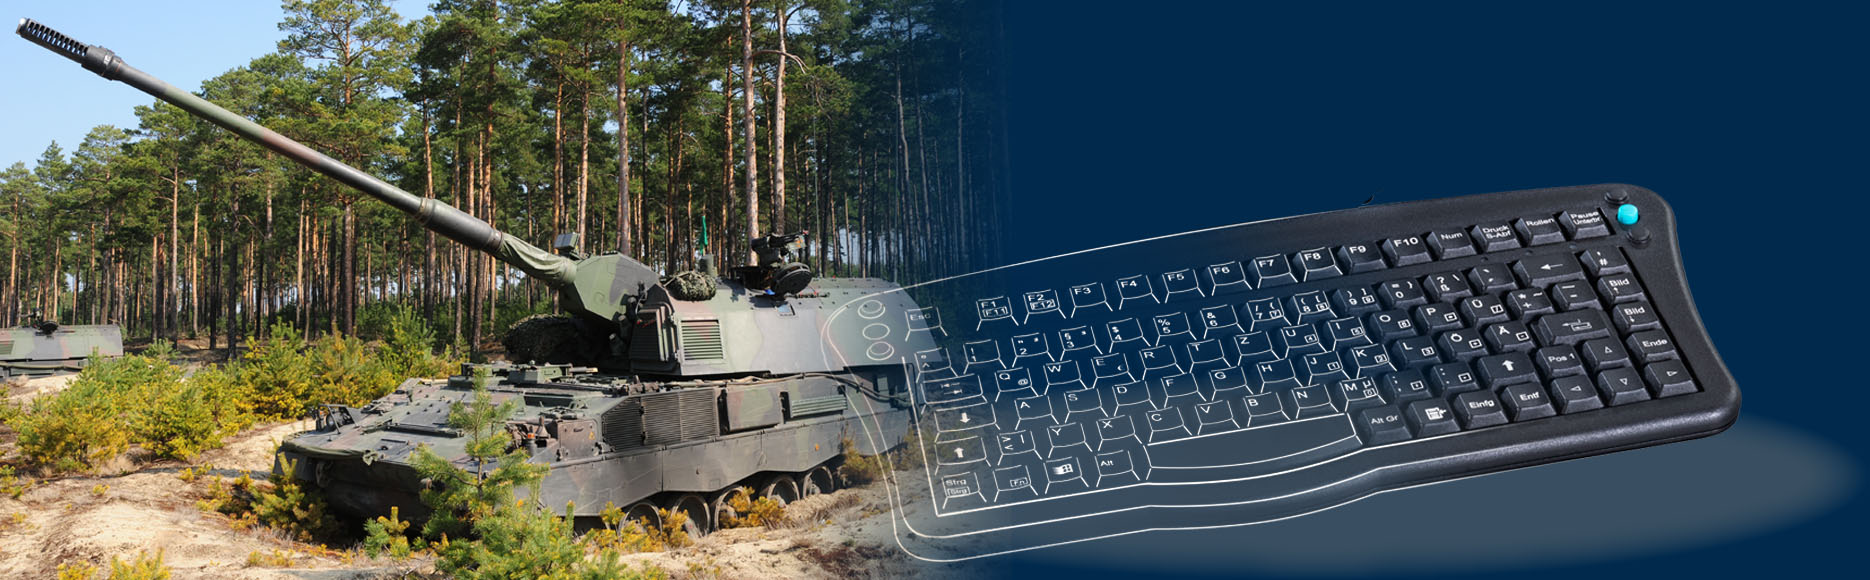 PzH2000 armoured howitzer dug into the forest floor and key visual of a keyboard